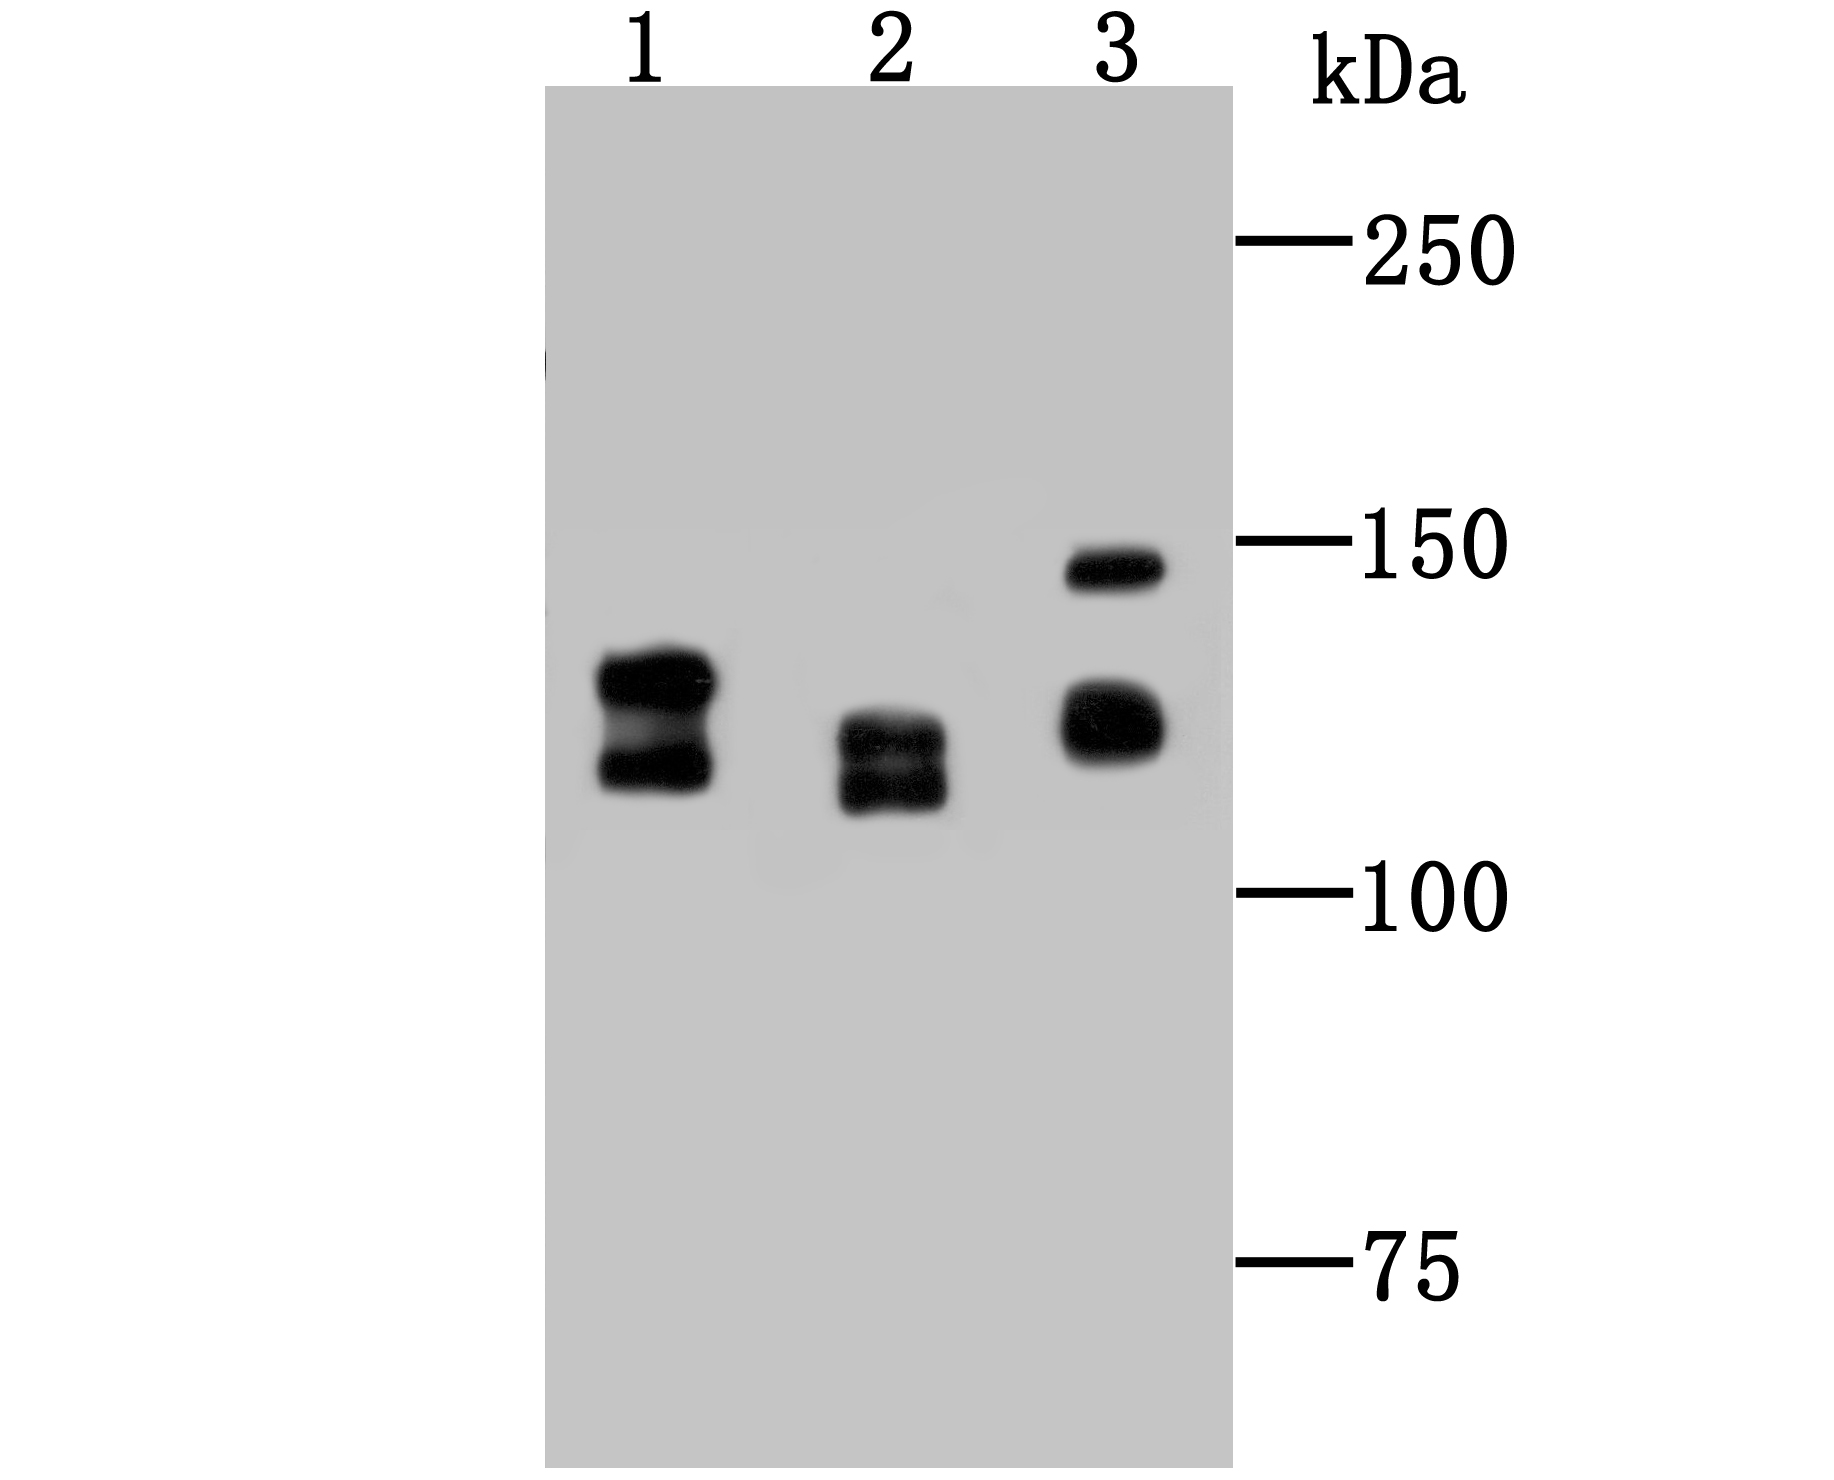 Western blot analysis of DDB1 on different cell lysate using anti-DDB1 antibody at 1/1,000 dilution. Positive control: Lane 1: Mouse colon tissue Lane 2: PC-12 Lane 3: Siha